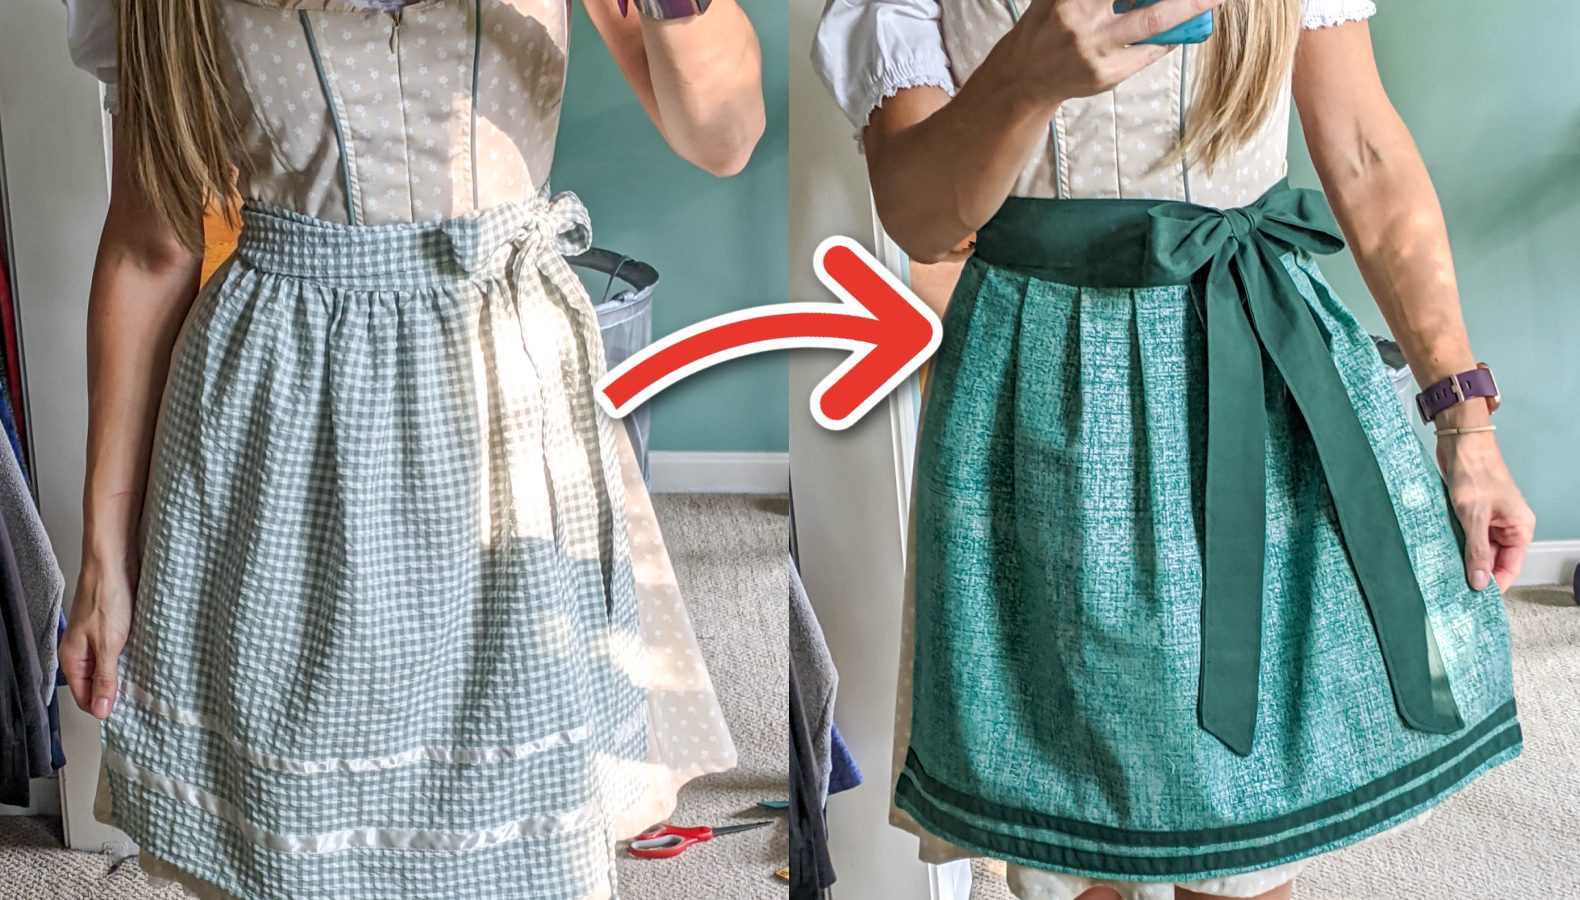 12 Super Easy Ways to Upgrade a Cheap Dirndl for Oktoberfest: Simple Oktoberfest Outfit Hacks; What to wear for Oktoberfest, how to upgrade your dirndl; DIY Oktoberfest outfit for women; upgrade your dirndl apron, blouse, and more.